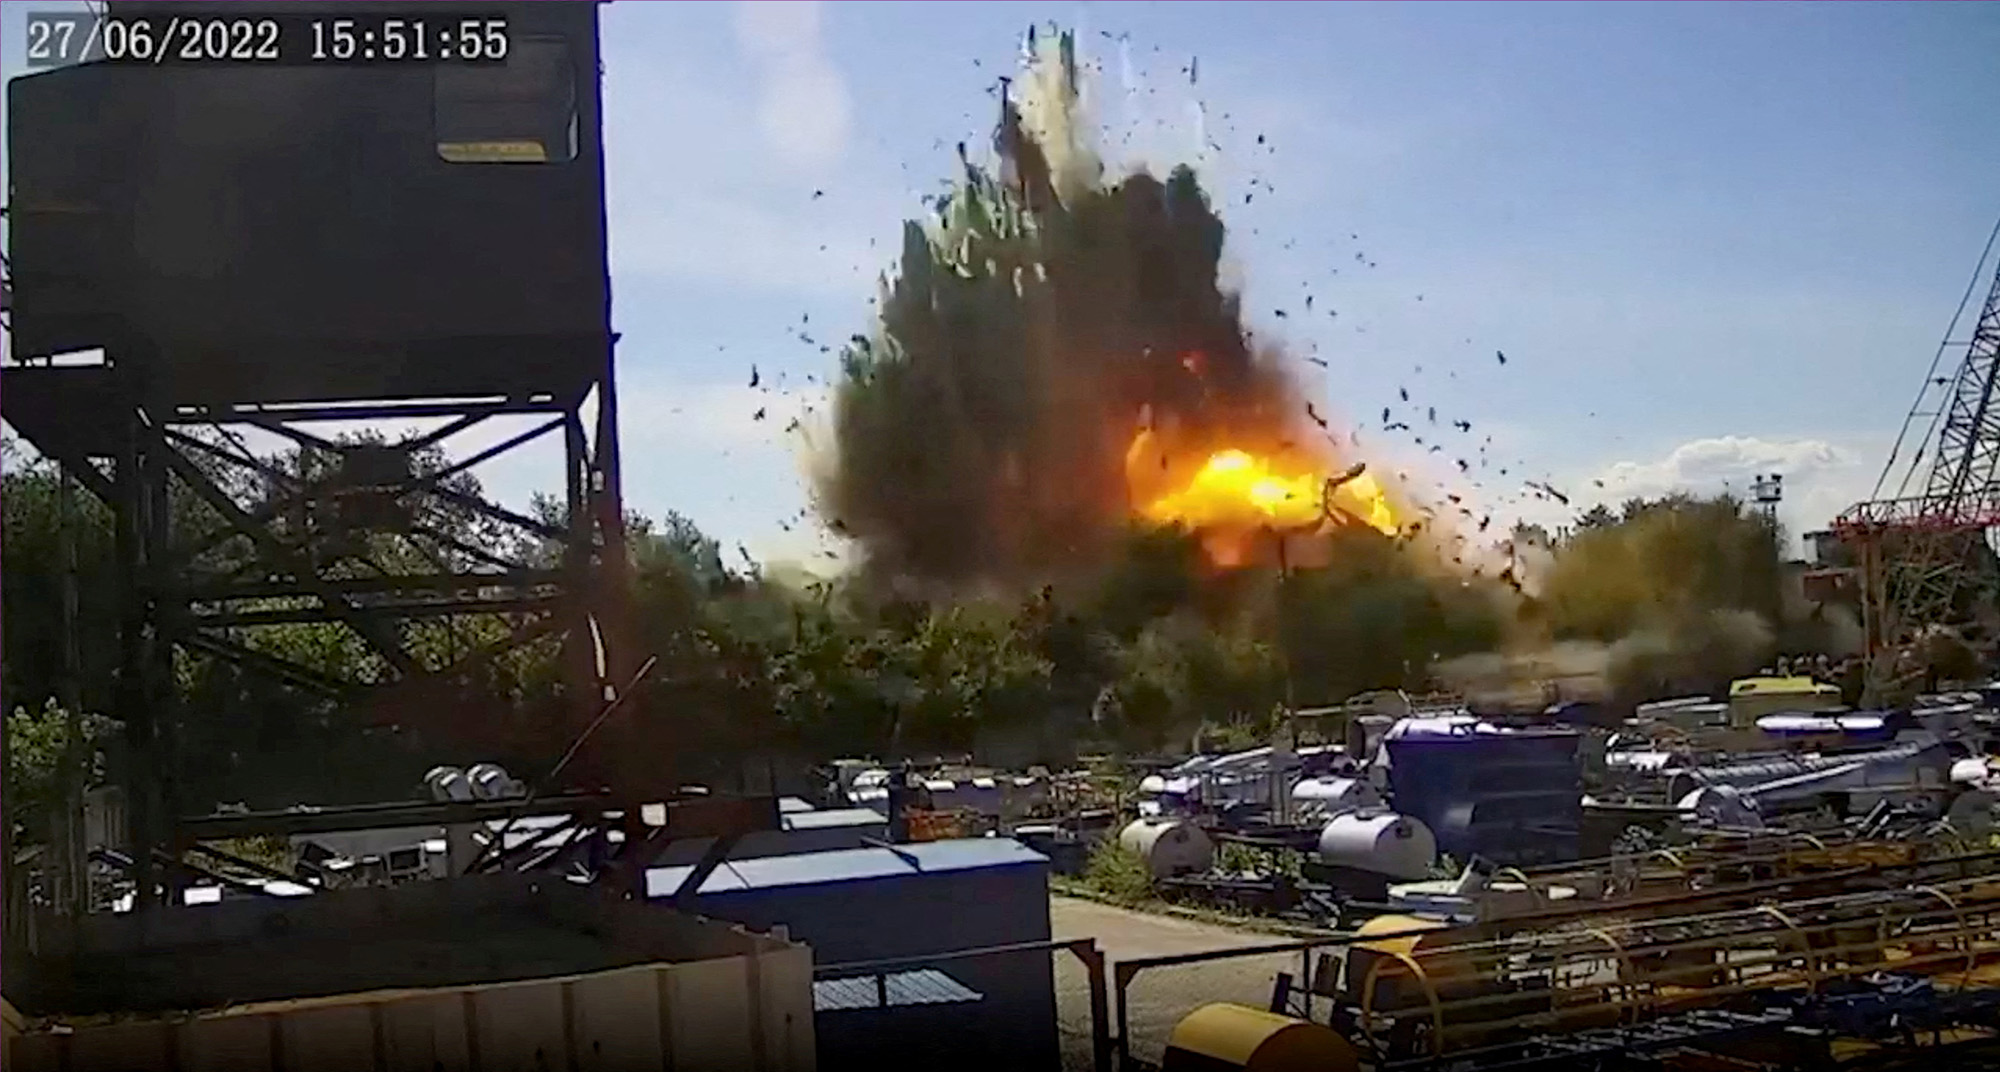 A view of the explosion at the Kremenchuk shopping mall, Ukraine, in this still image taken from handout CCTV footage released on June 28.